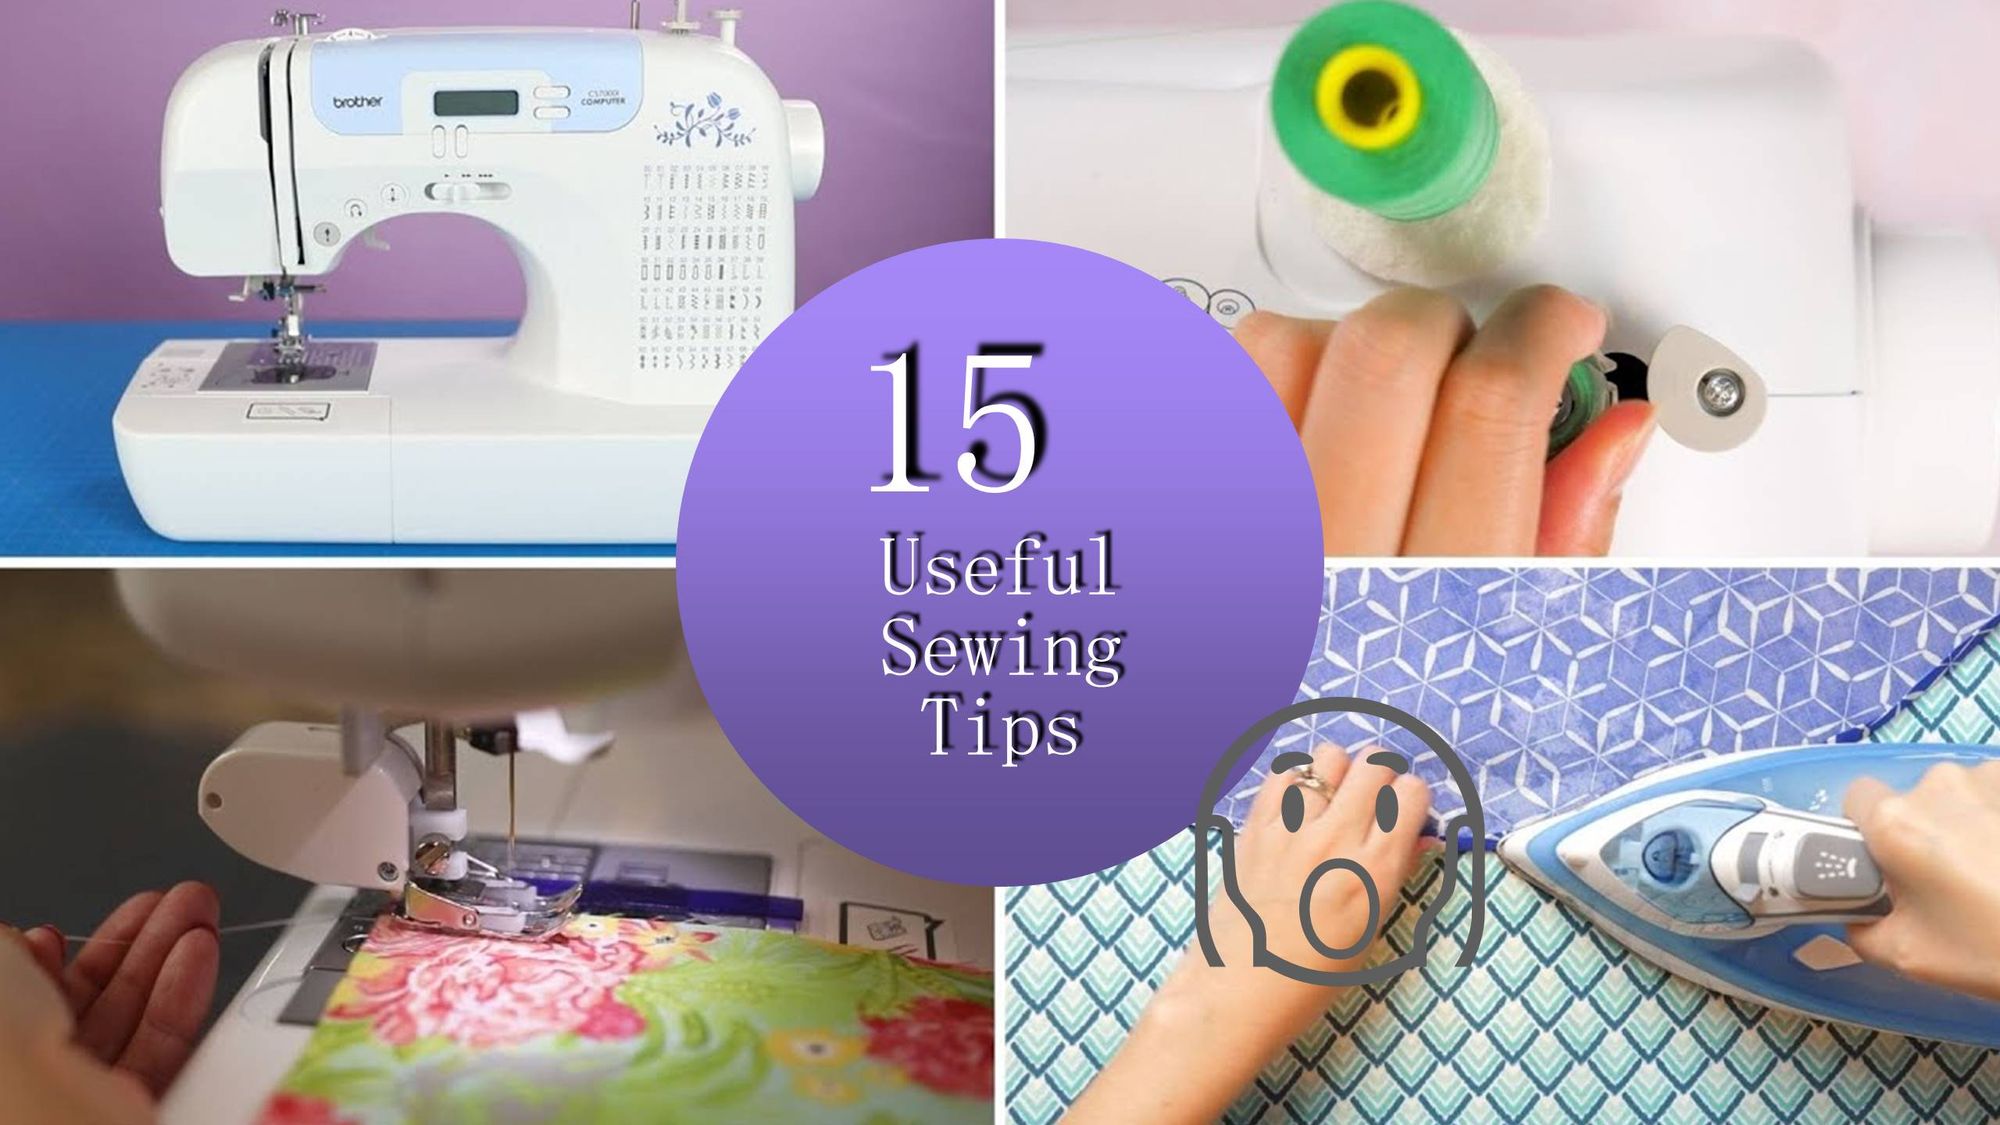 15 awesome sewing tips on IG with free video editor 